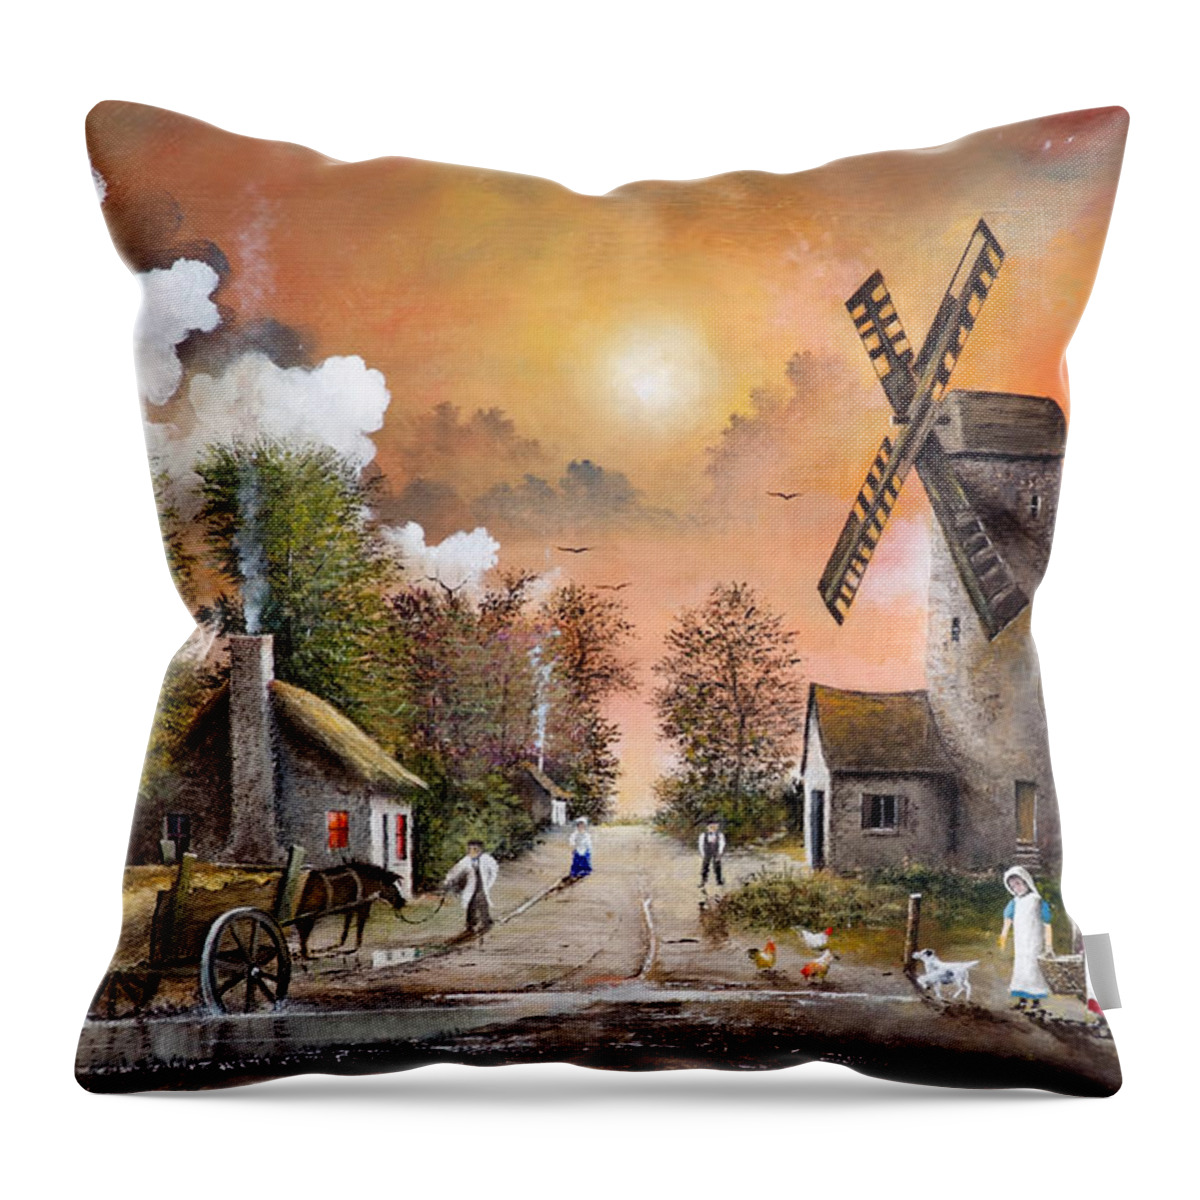 Countryside Throw Pillow featuring the painting Church View - England by Ken Wood